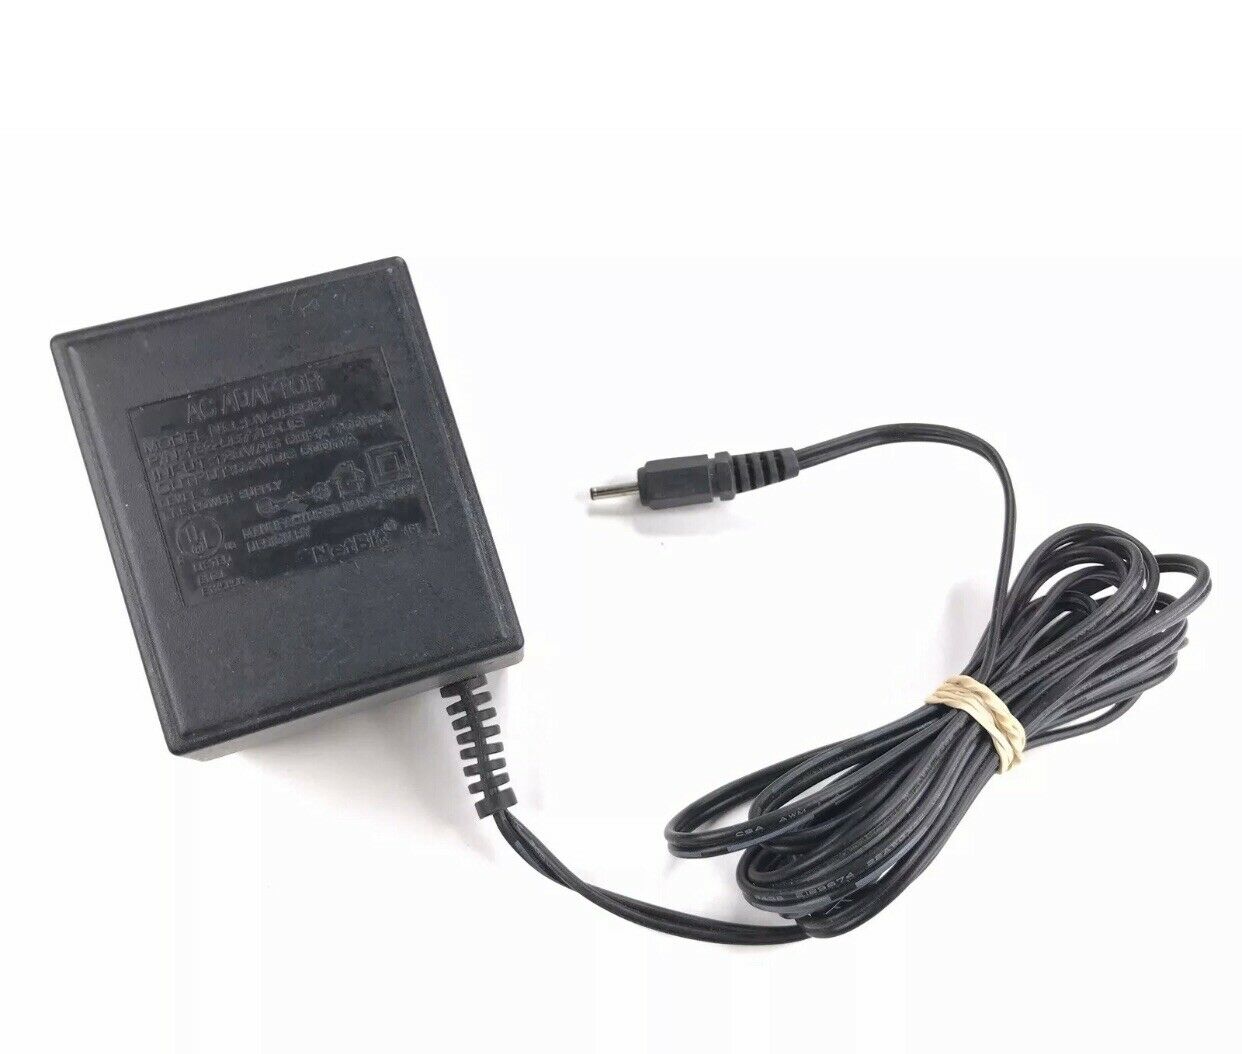 NetBit DV-0555R-1 163-5877B-US AC Power Supply Adapter Charger Output 5.2V 500mA